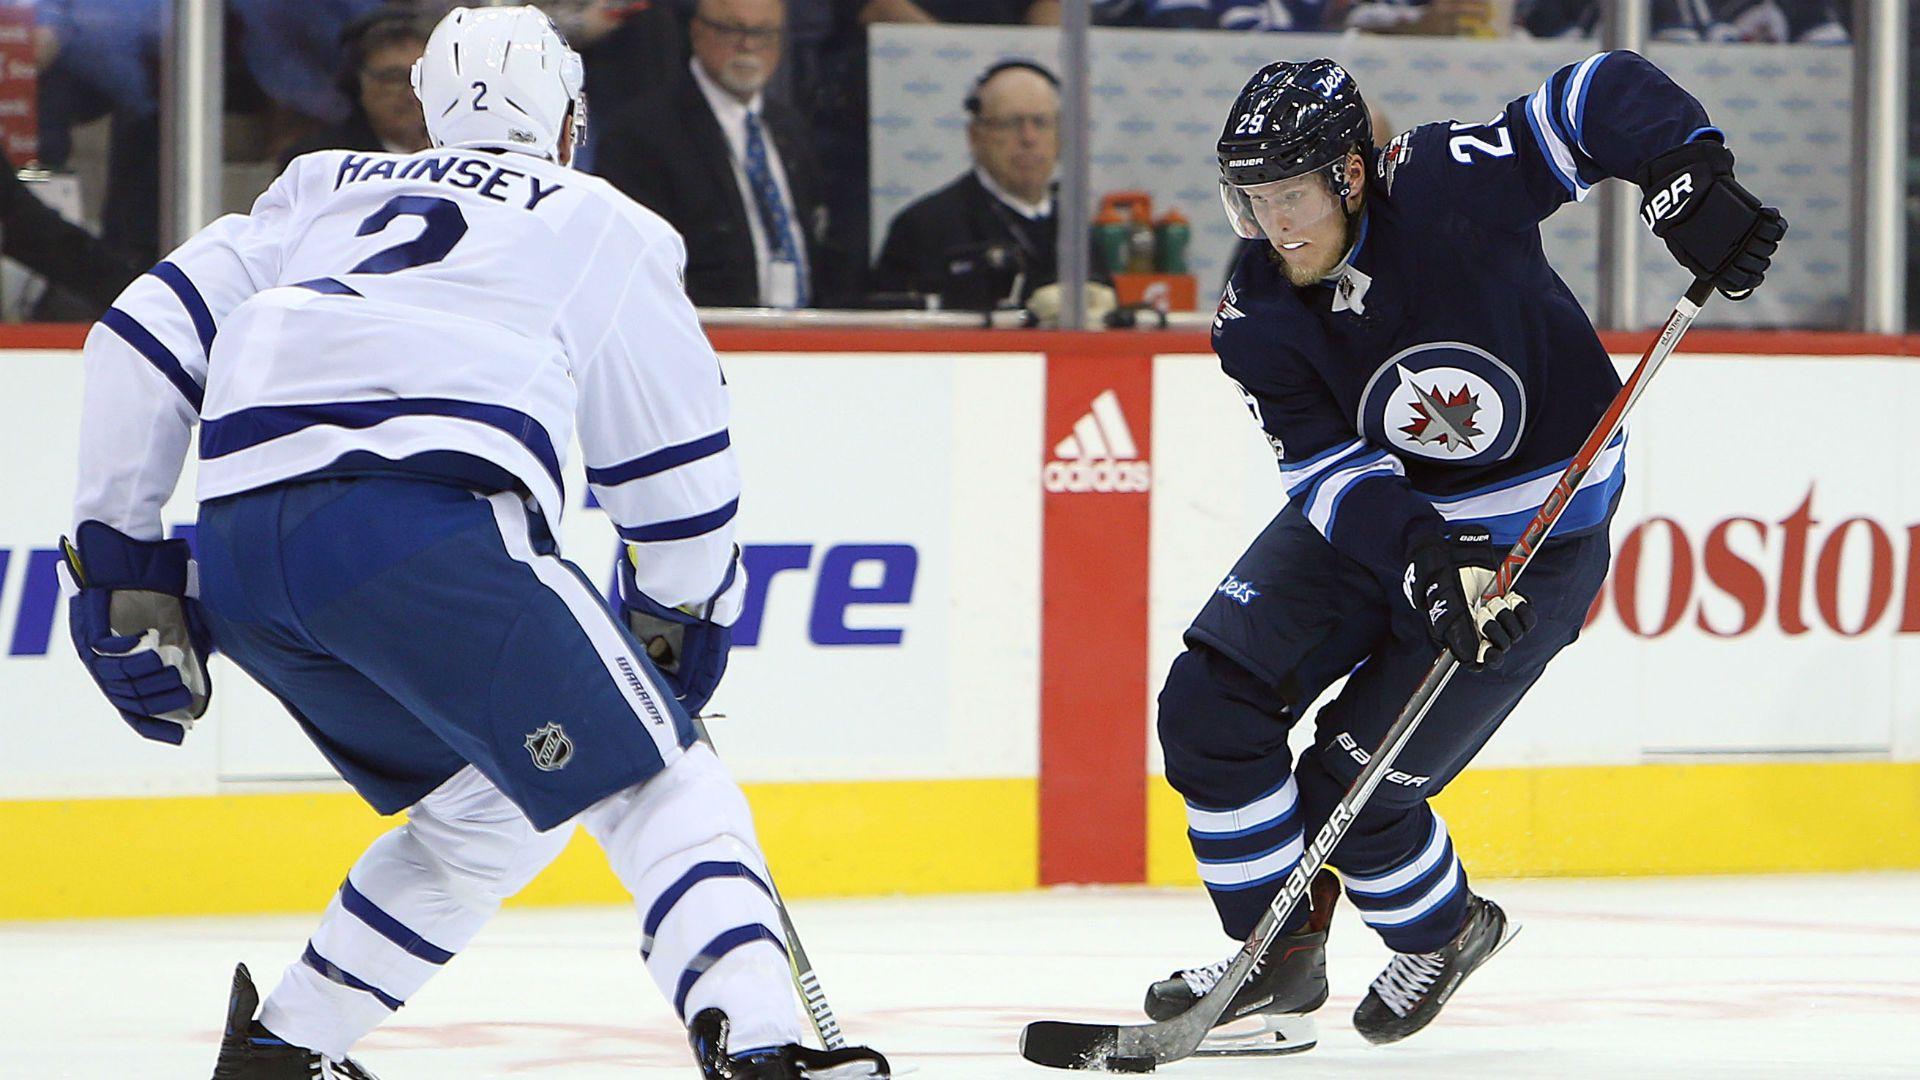 Laine 'ashamed' after Jets loss to Maple Leafs